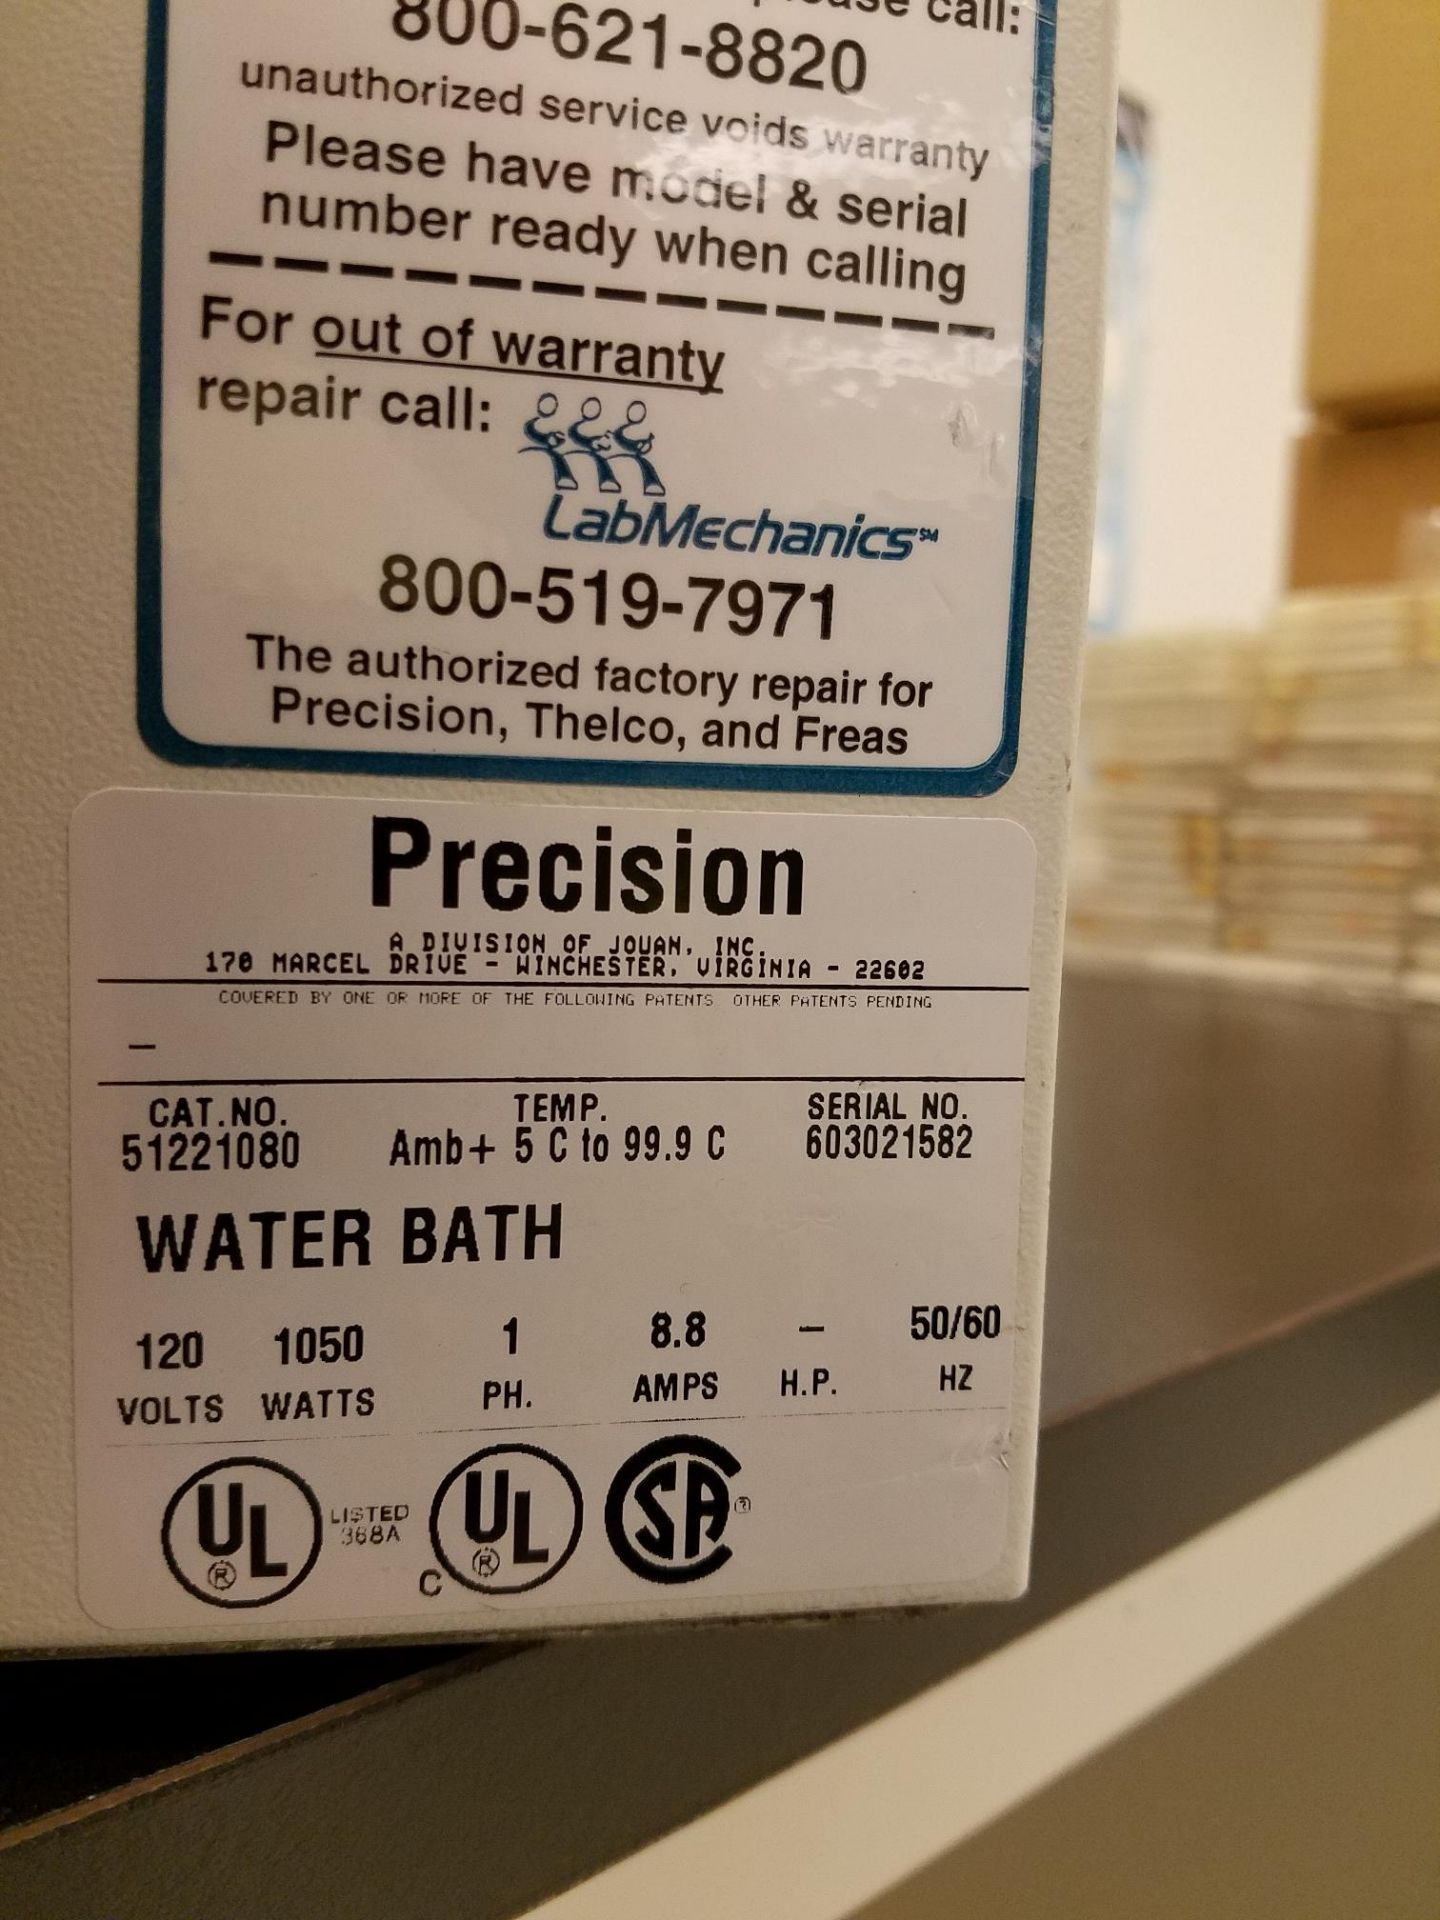 Precision, Water Bath, S/N 603021582 - Image 2 of 2